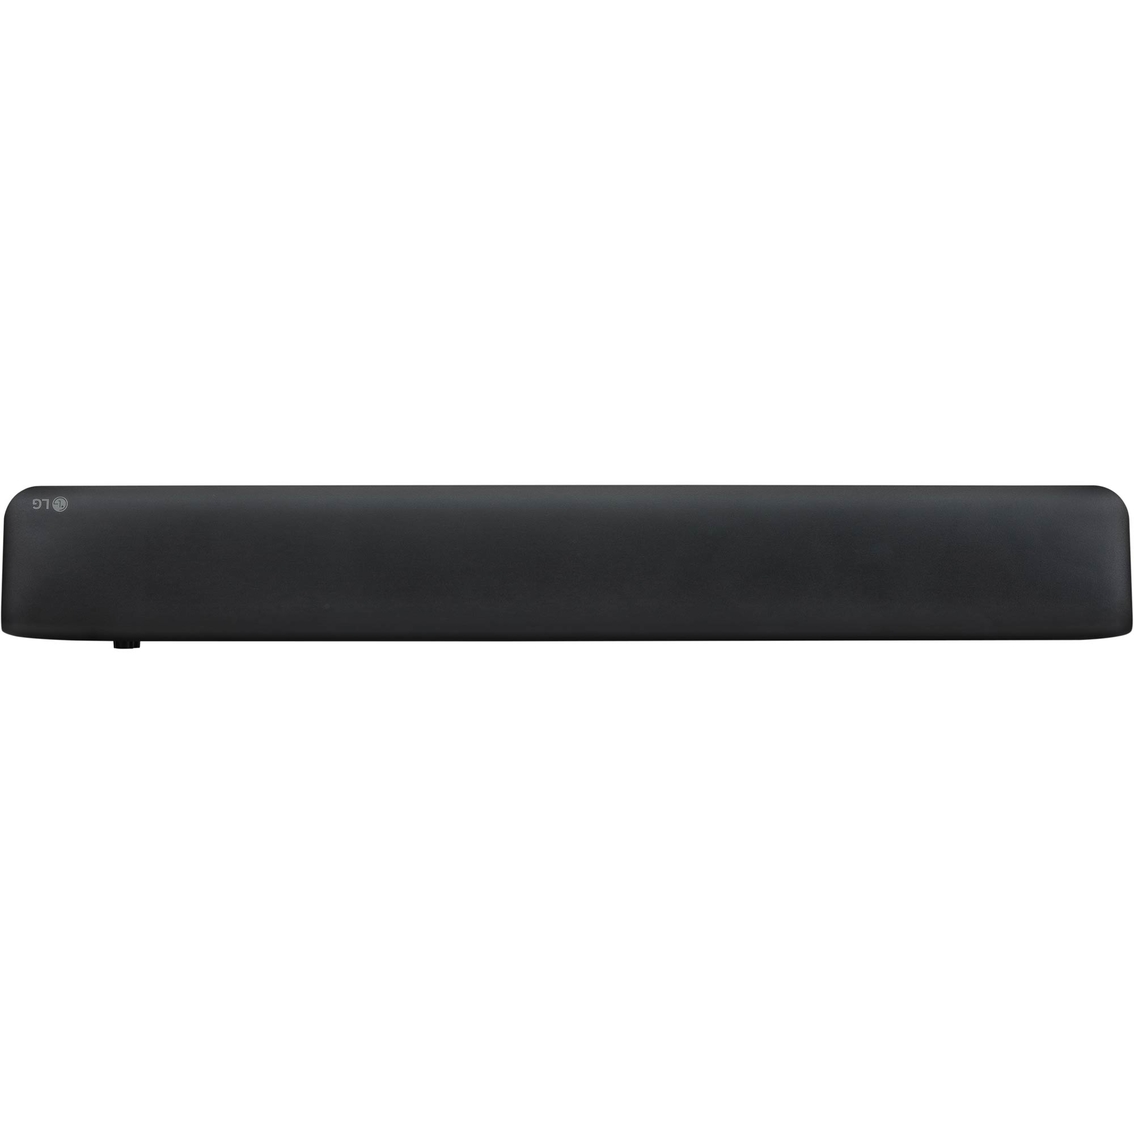 LG SK1 2.0 Channel Compact Sound Bar with Bluetooth Connectivity - Image 4 of 8